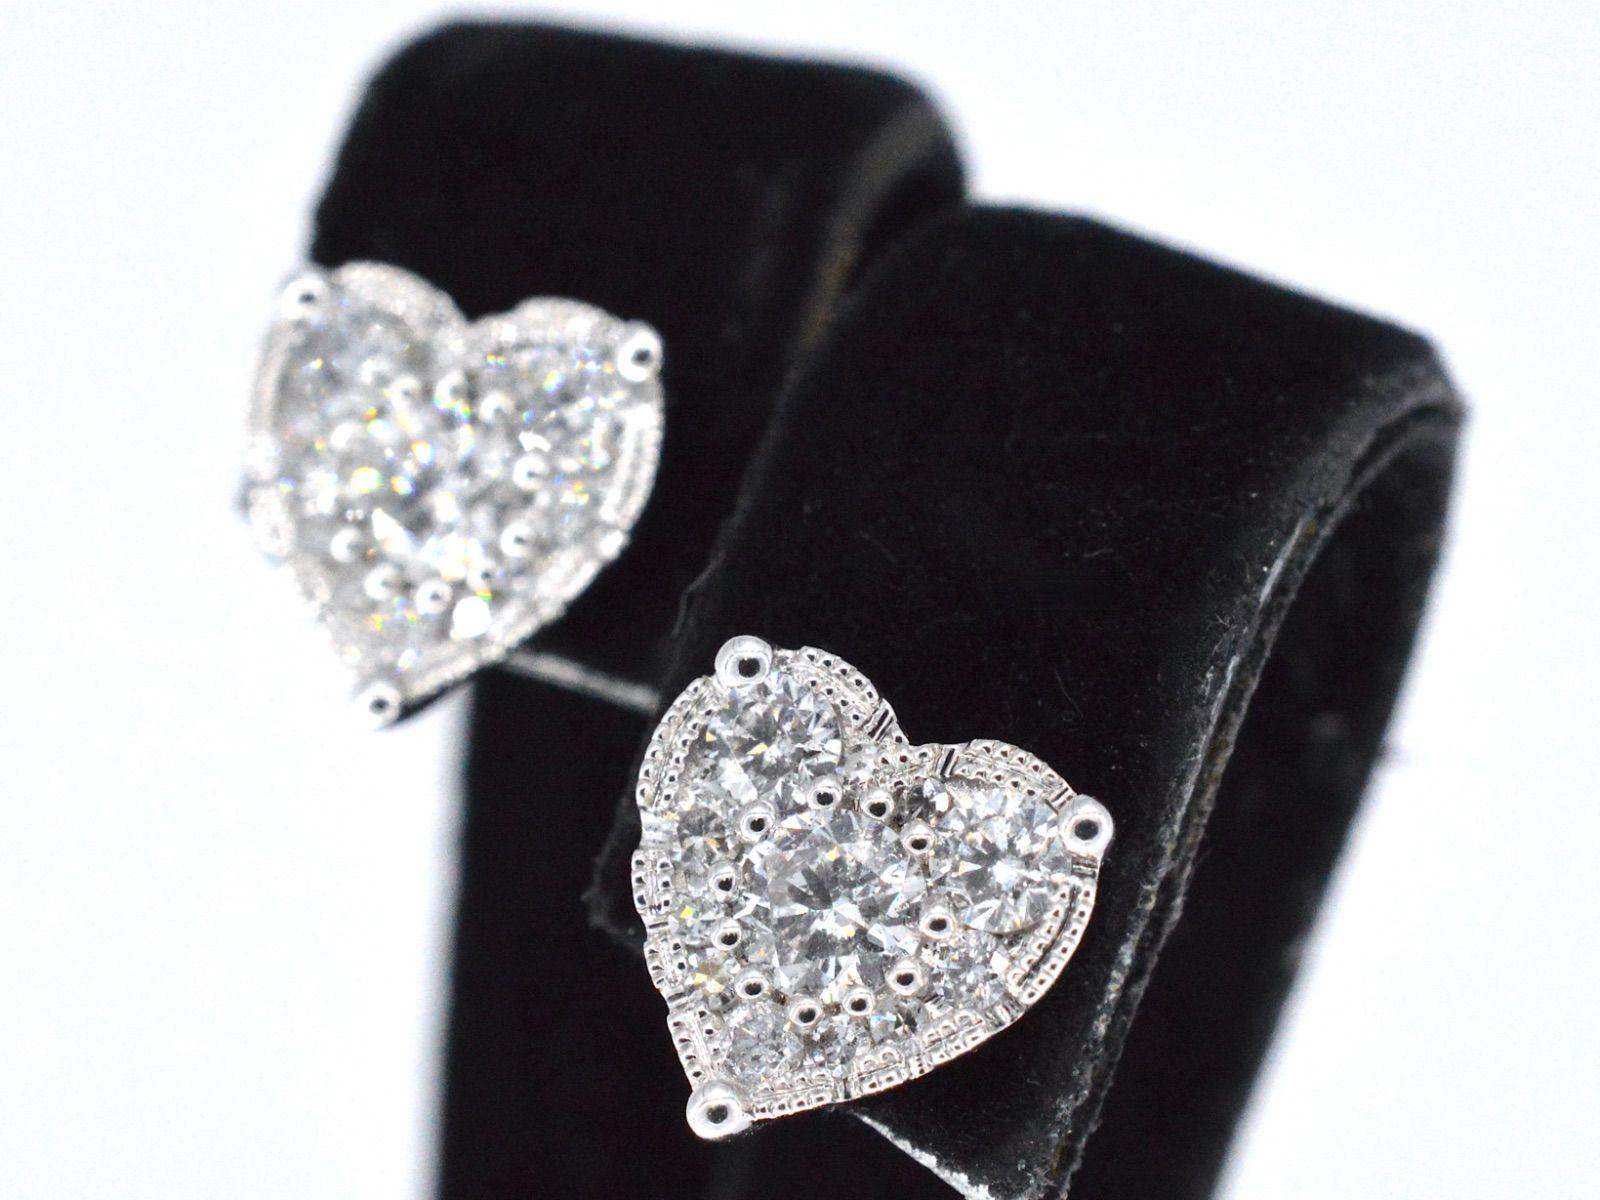 White gold earrings with brilliant cut diamonds in a heart-shape are a beautiful and romantic piece of jewelry that symbolizes love and affection. The heart-shaped design adds a touch of sentimentality to the earrings, making them an ideal gift for